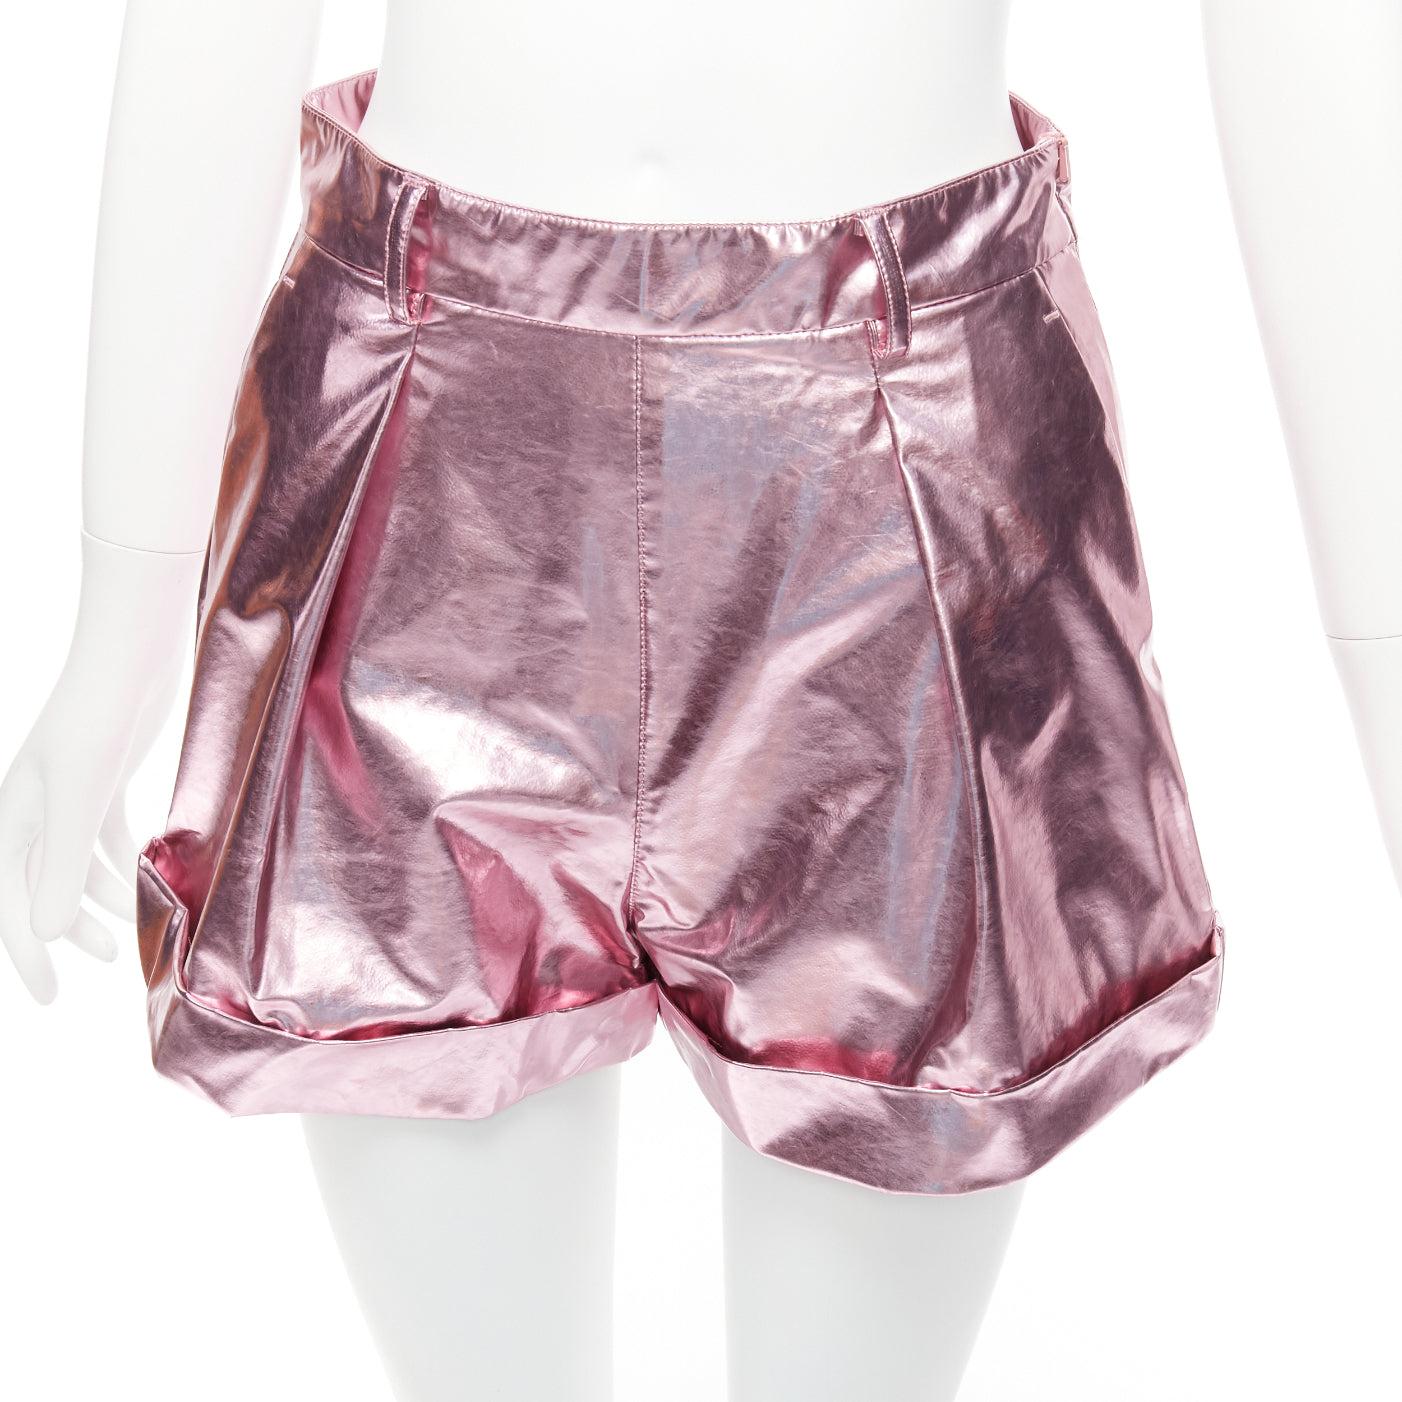 PHILOSOPHY LORENZO SERAFINI metallic pink PU high waisted cuffed shorts IT40 XS
Reference: AAWC/A00575
Brand: Philosophy
Designer: Lorenzo Serafini
Material: Plastic
Color: Pink
Pattern: Solid
Closure: Zip
Extra Details: Dual front pockets. Side zip